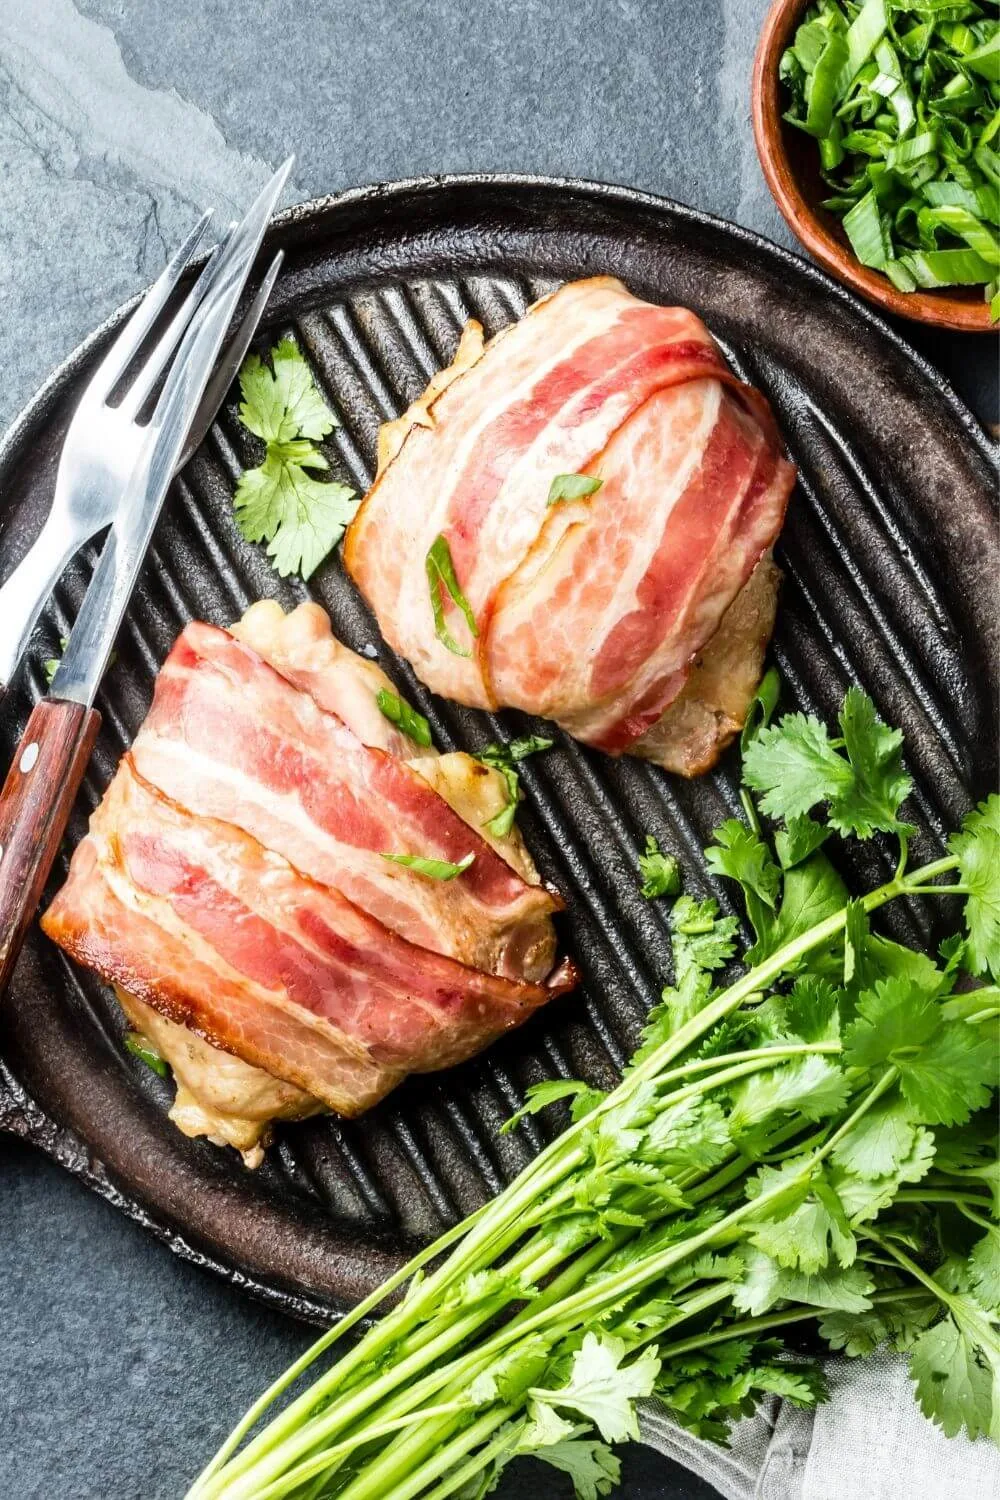 Costco Bacon Wrapped Chicken Instructions